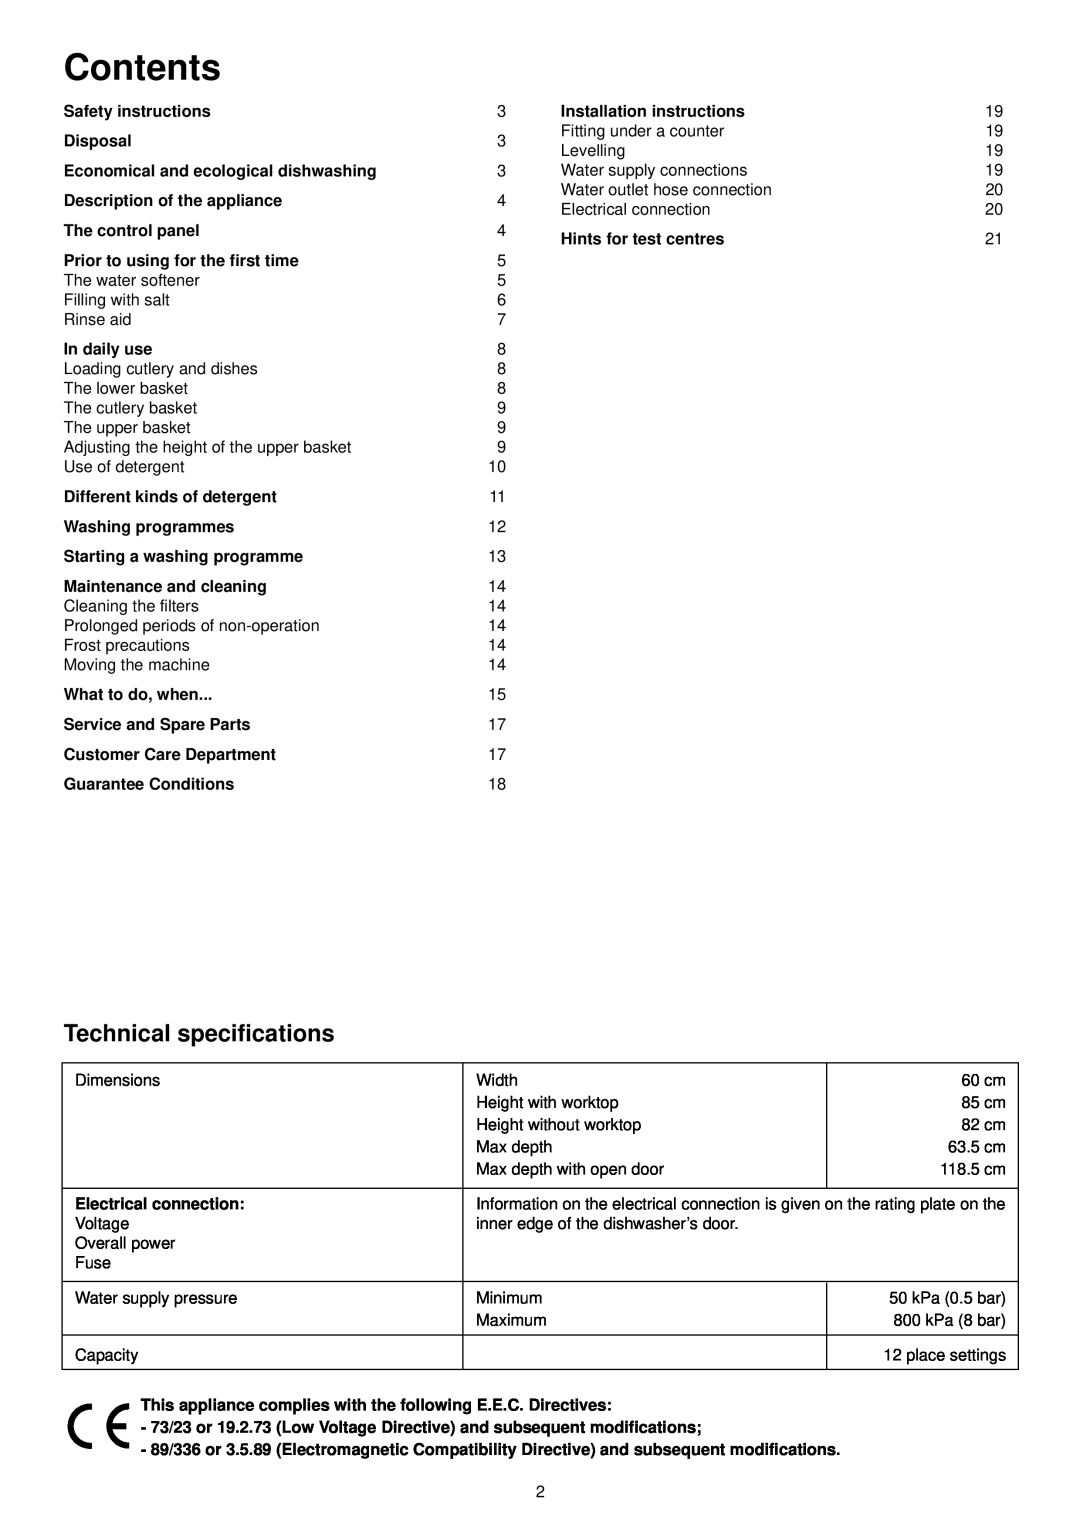 Zanussi ZSF 6120 manual Contents, Technical specifications 